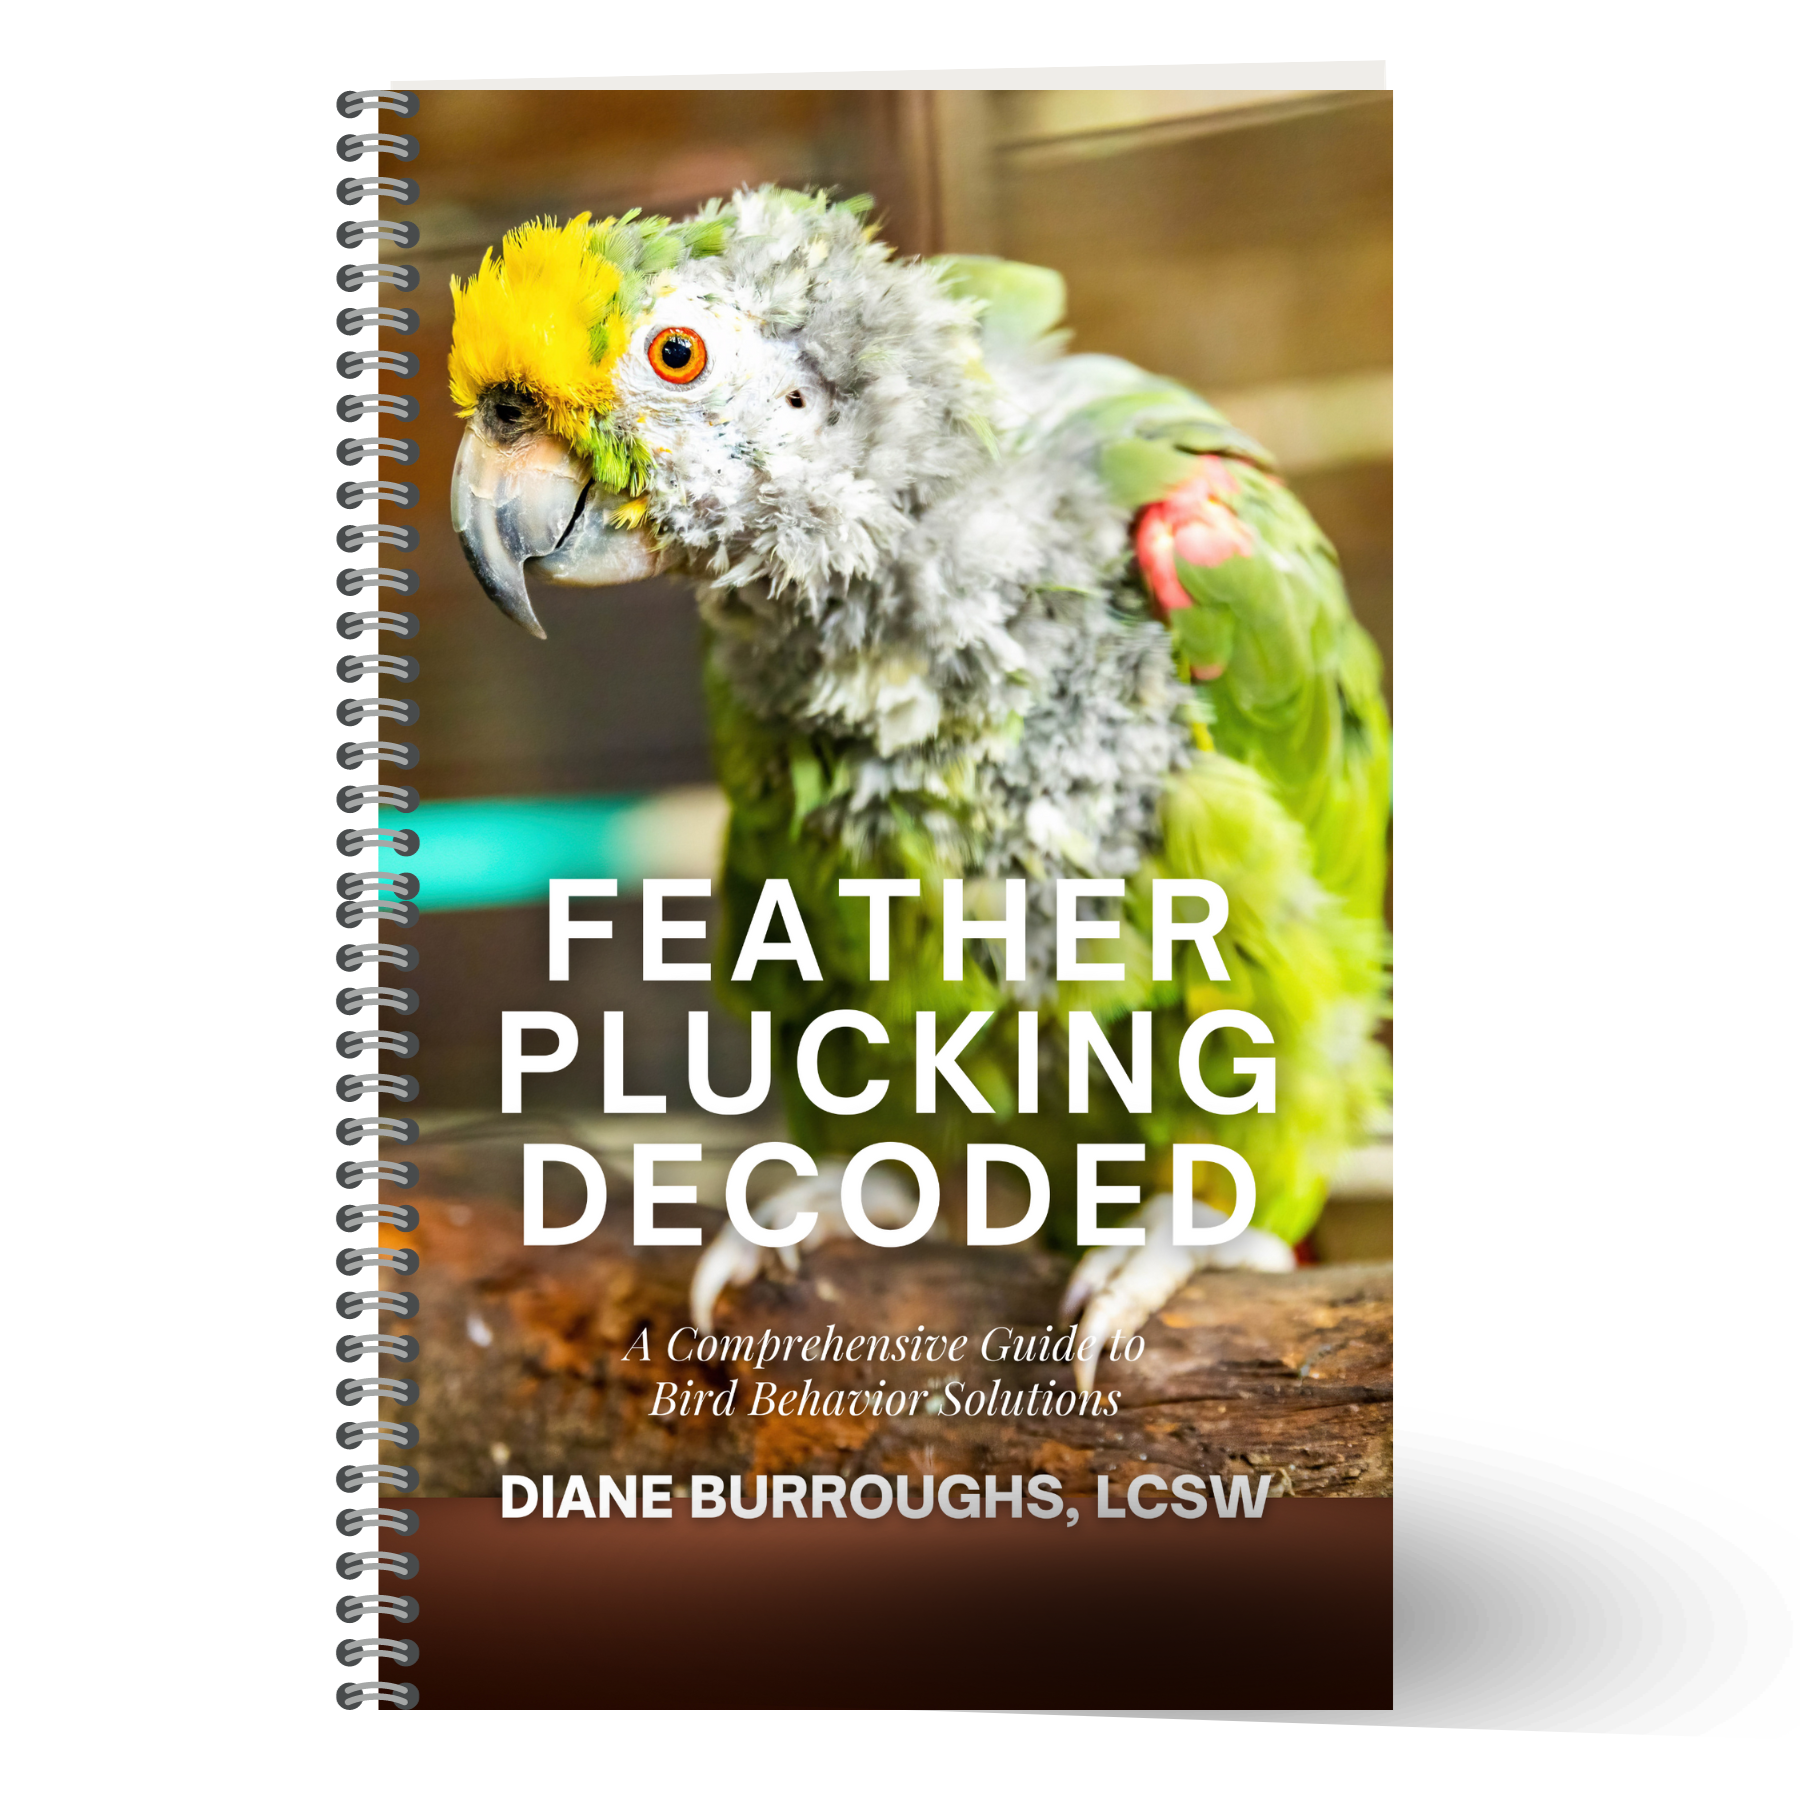 Feather Plucking Decoded